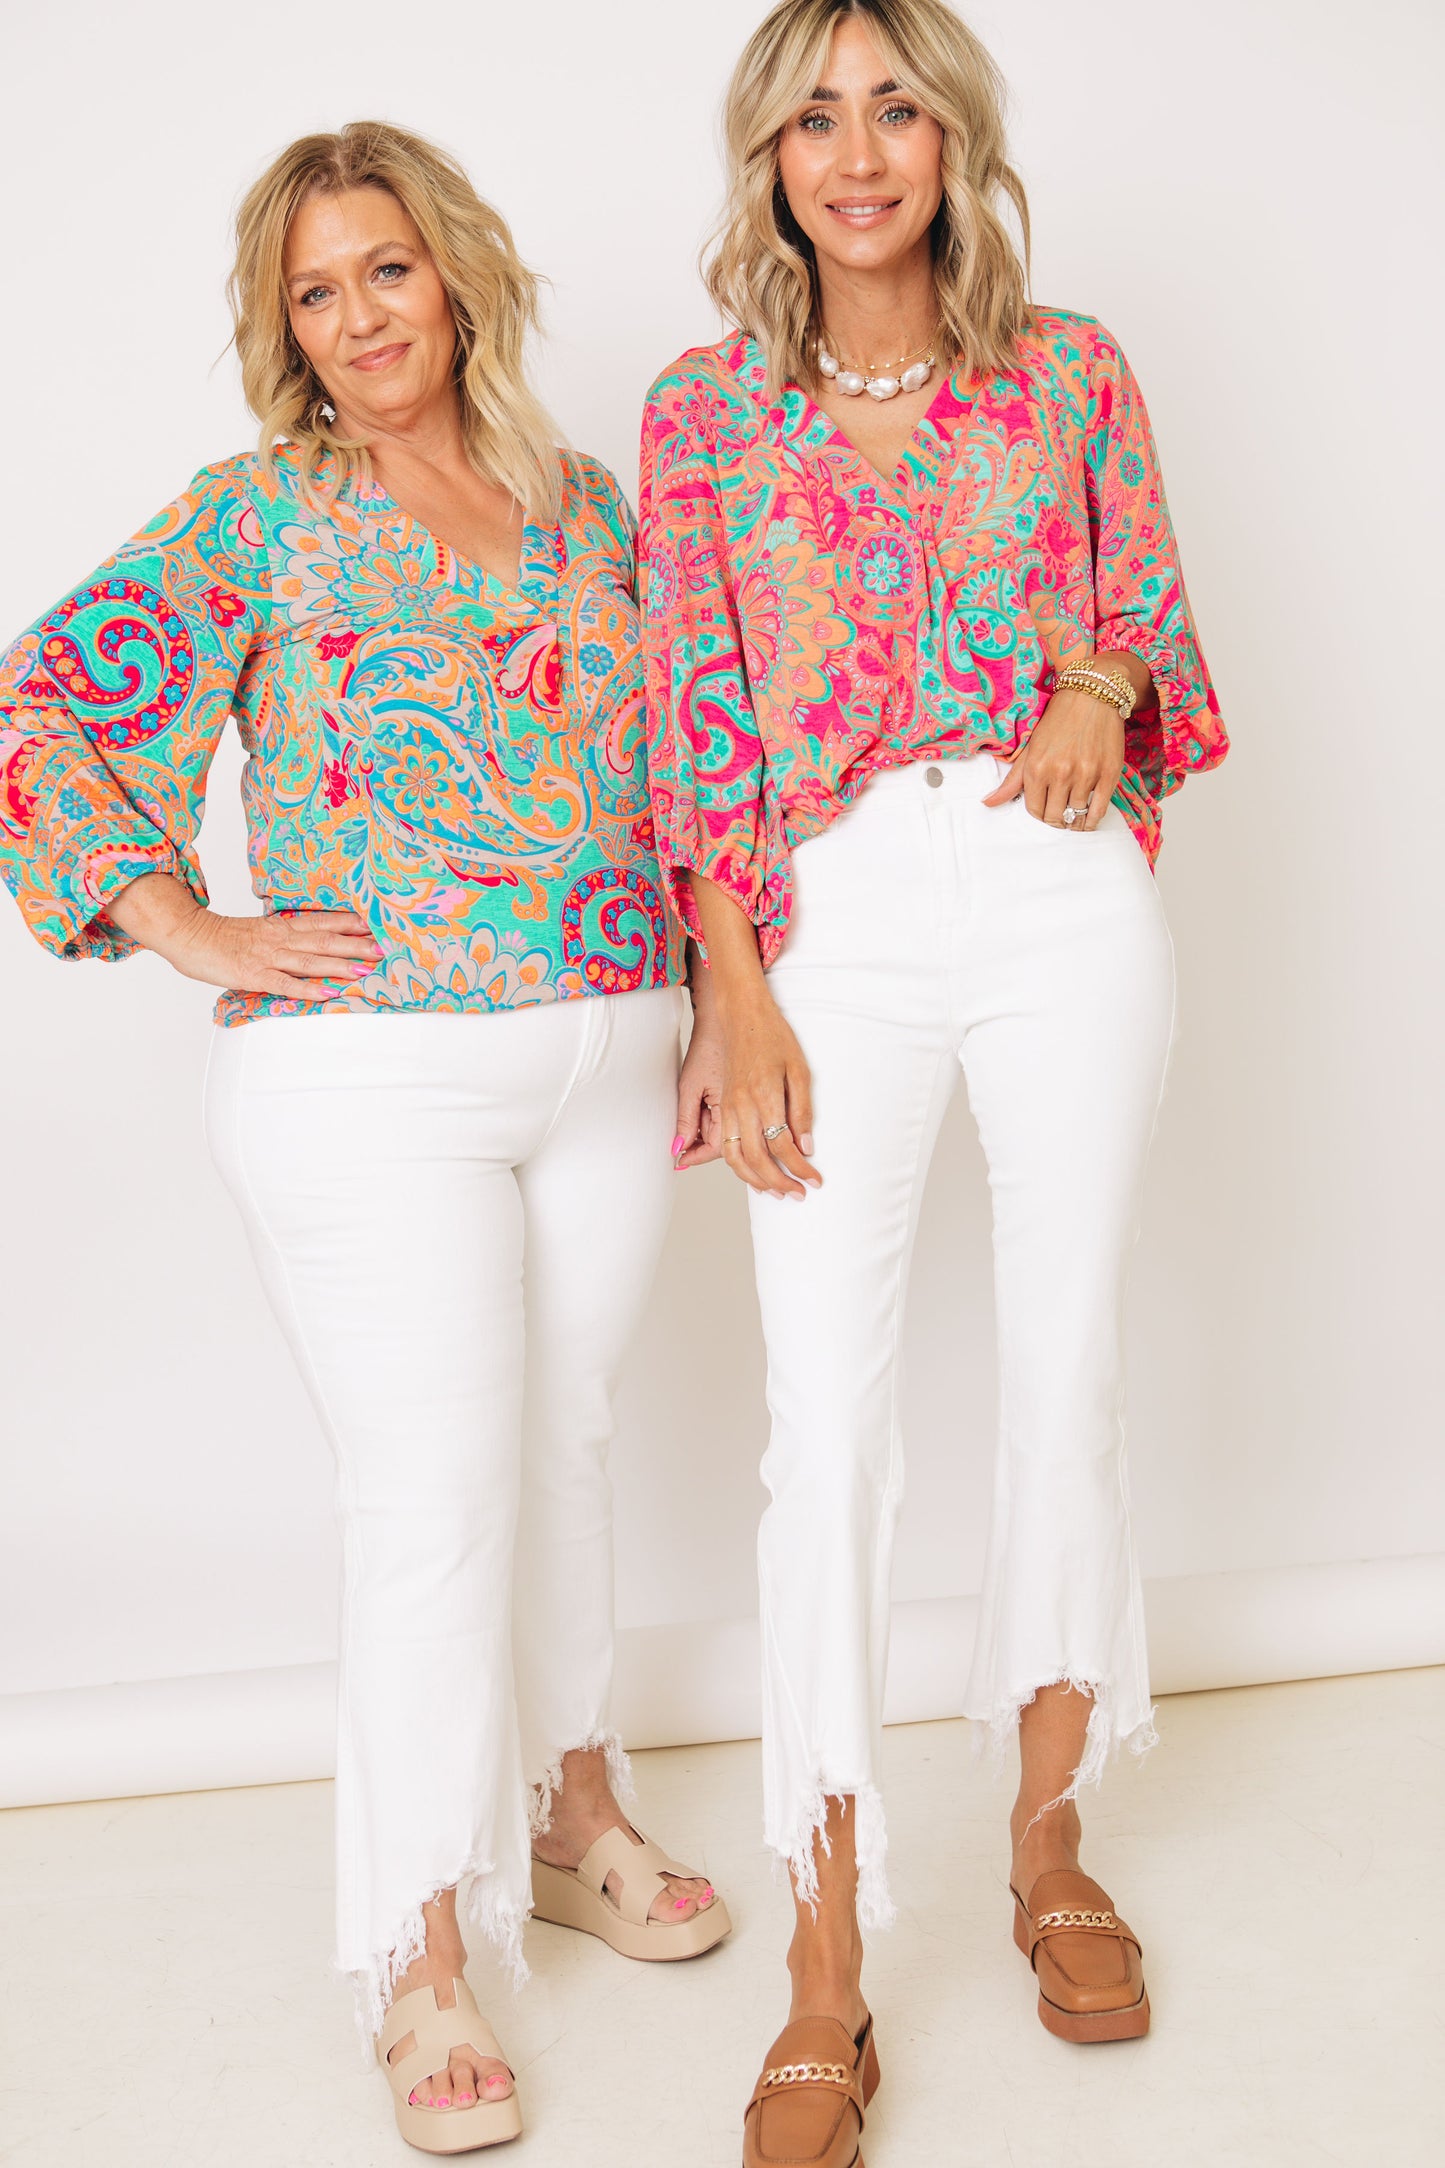 Paisley Patterned V-Neckline And Balloon Sleeves Blouse (S-3XL)